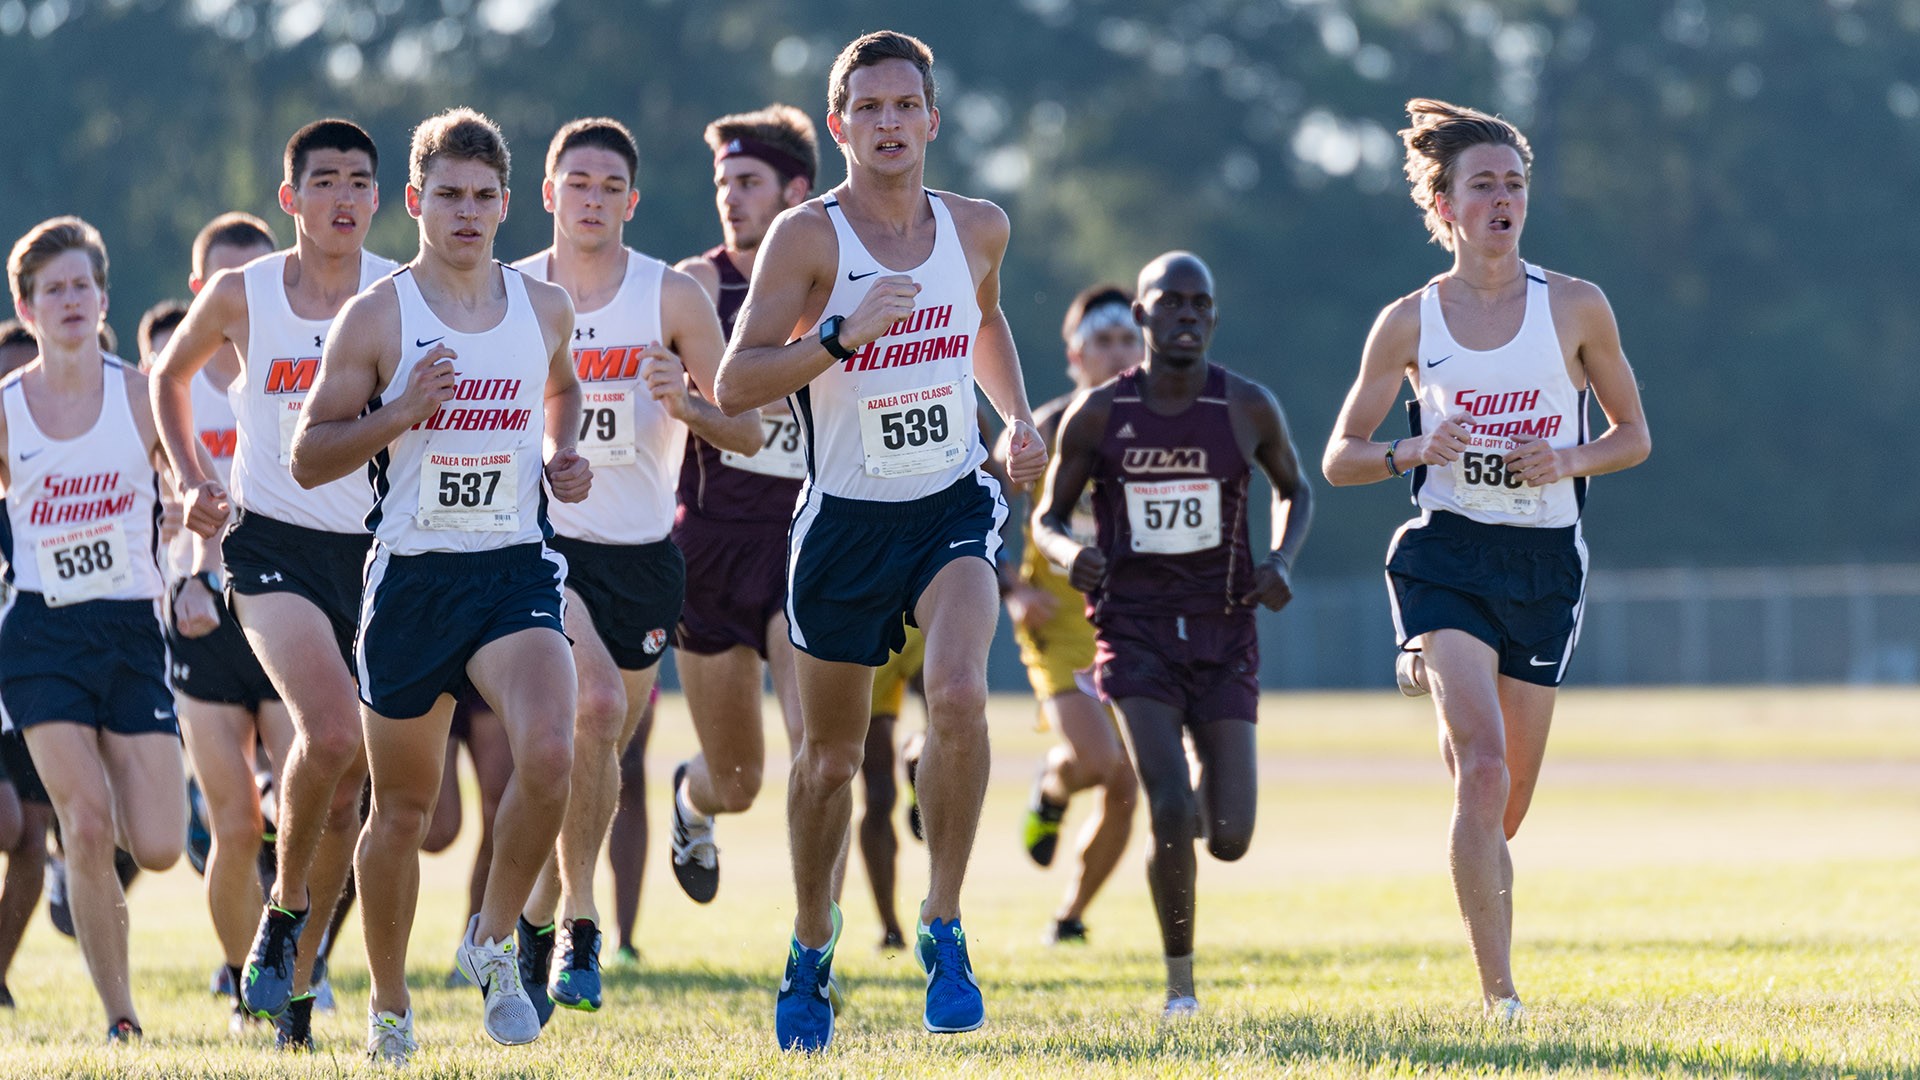 SOUTH ALABAMA CROSS COUNTRY RETURNS TO ACTION THIS WEEKEND AT THE